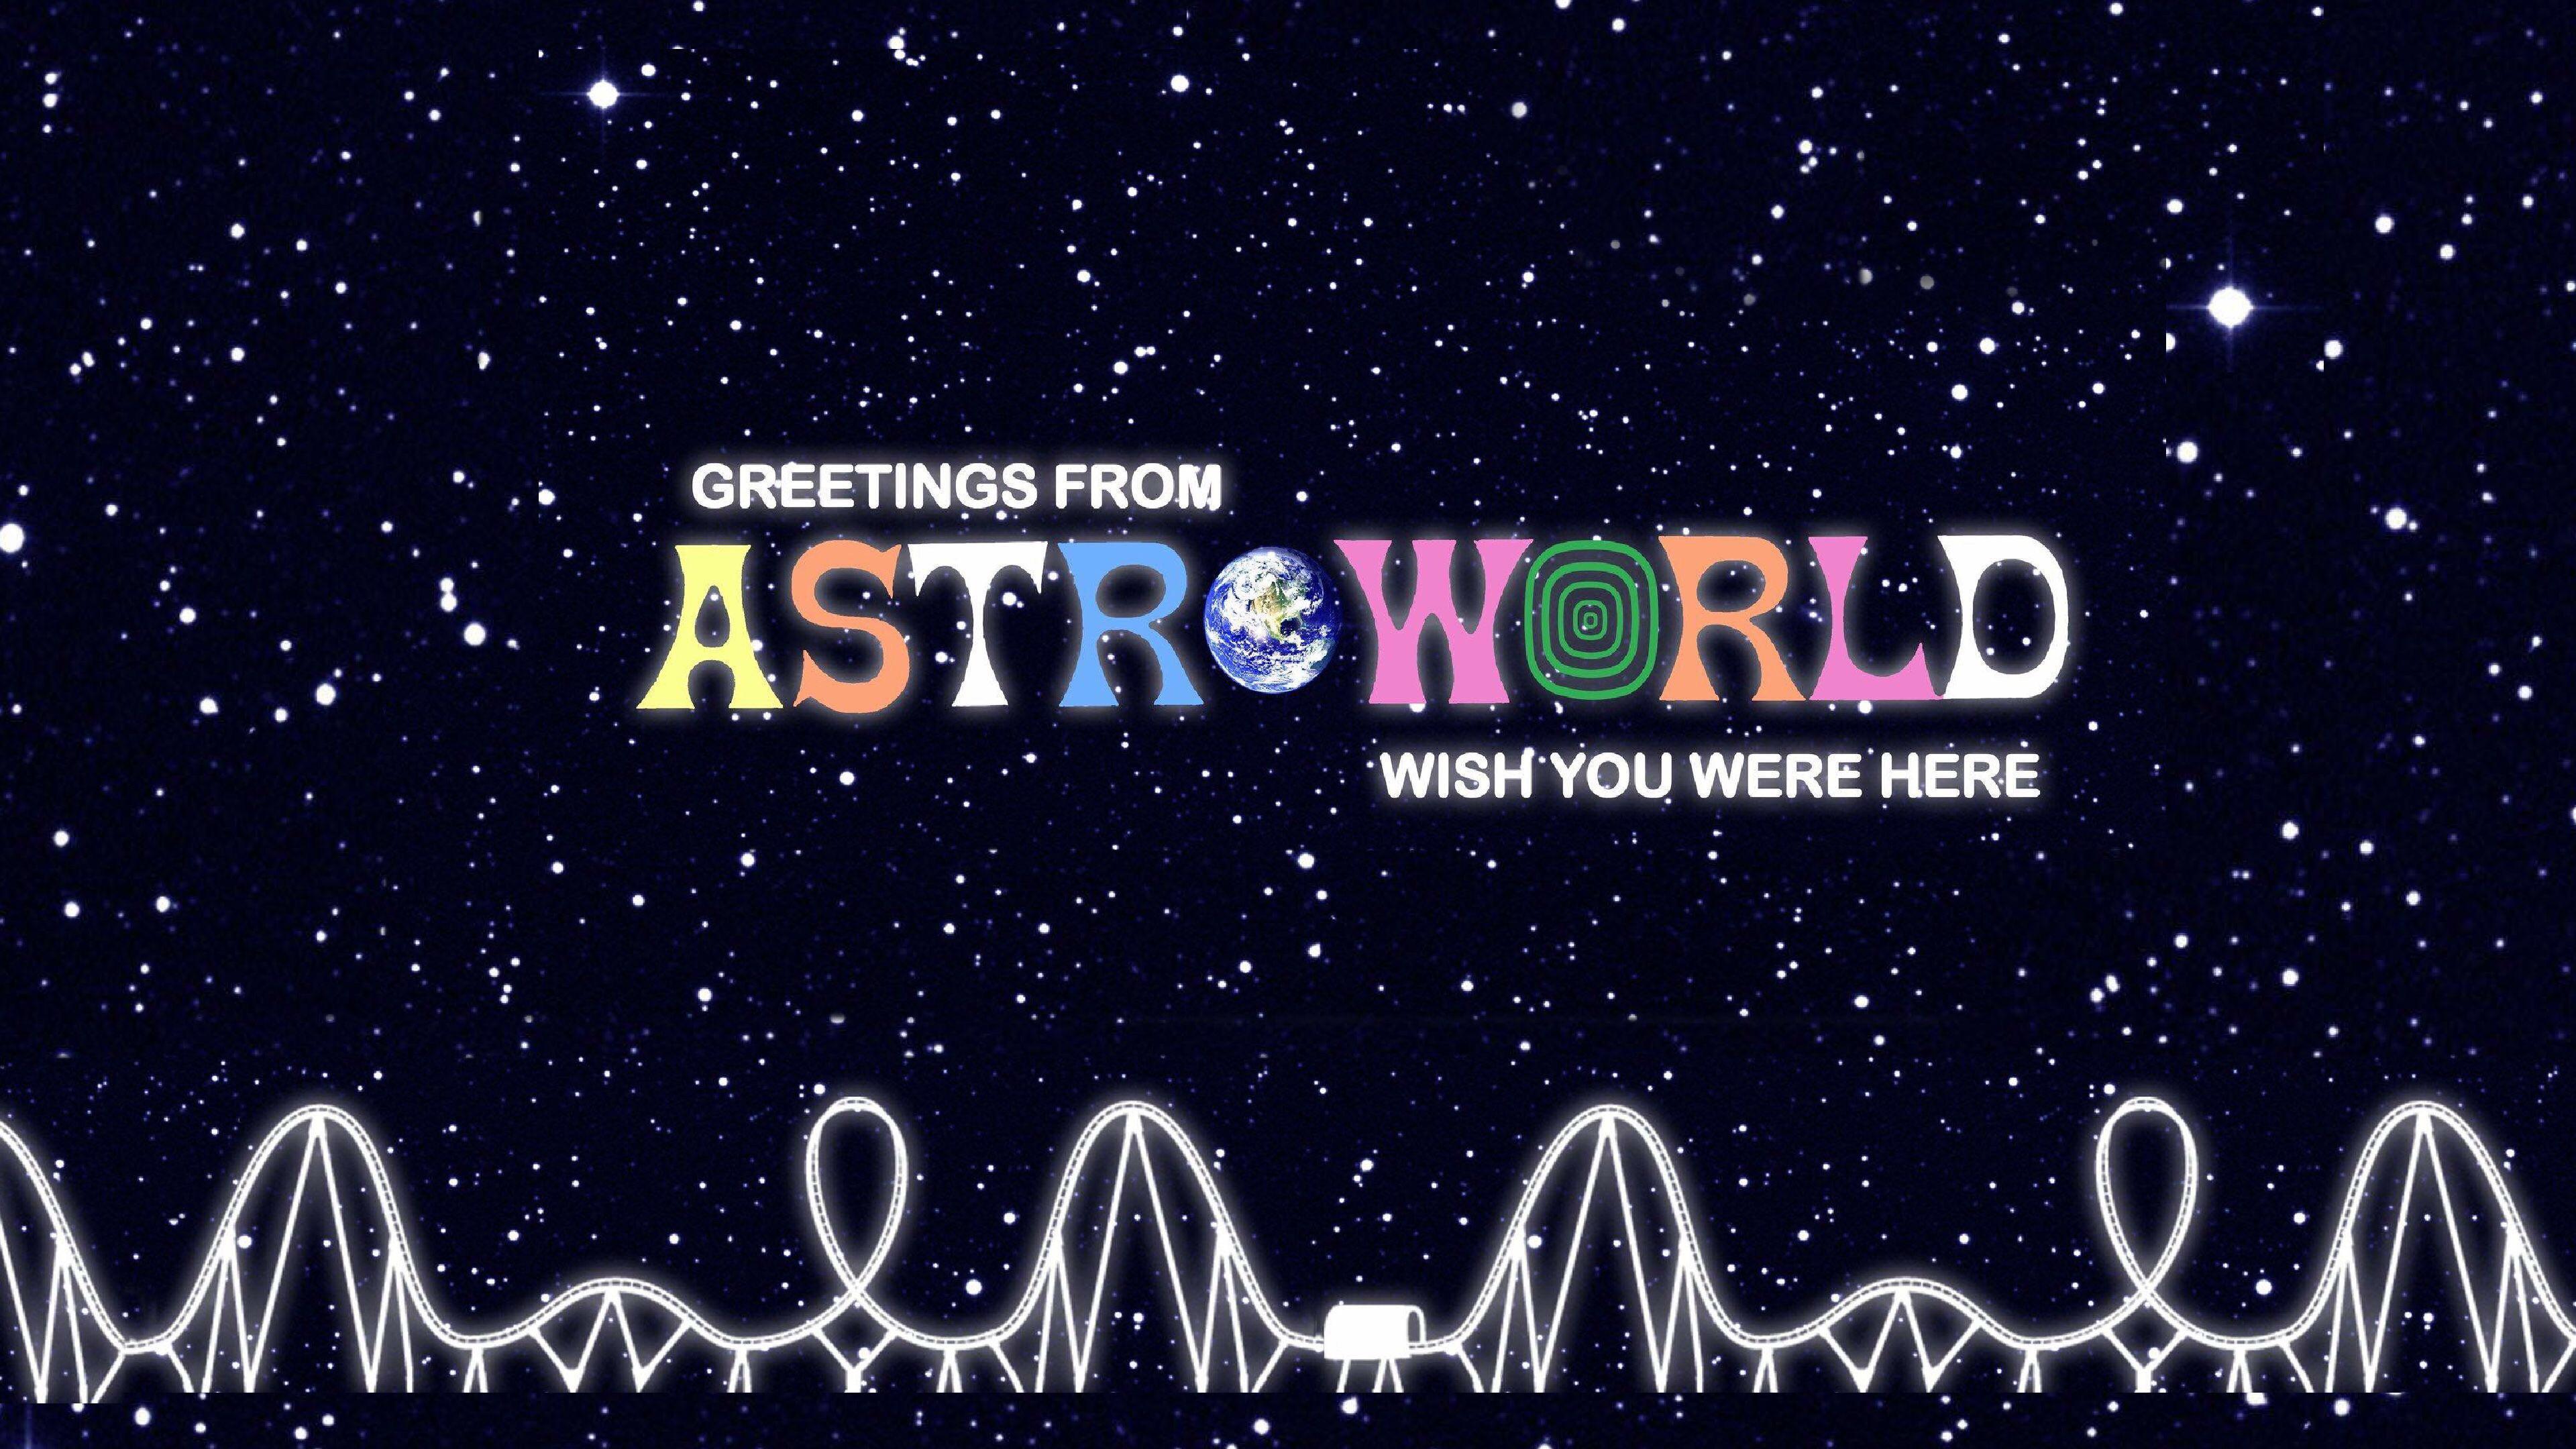 Astroworld Wallpaper I made for my MacBook Air! it's lit